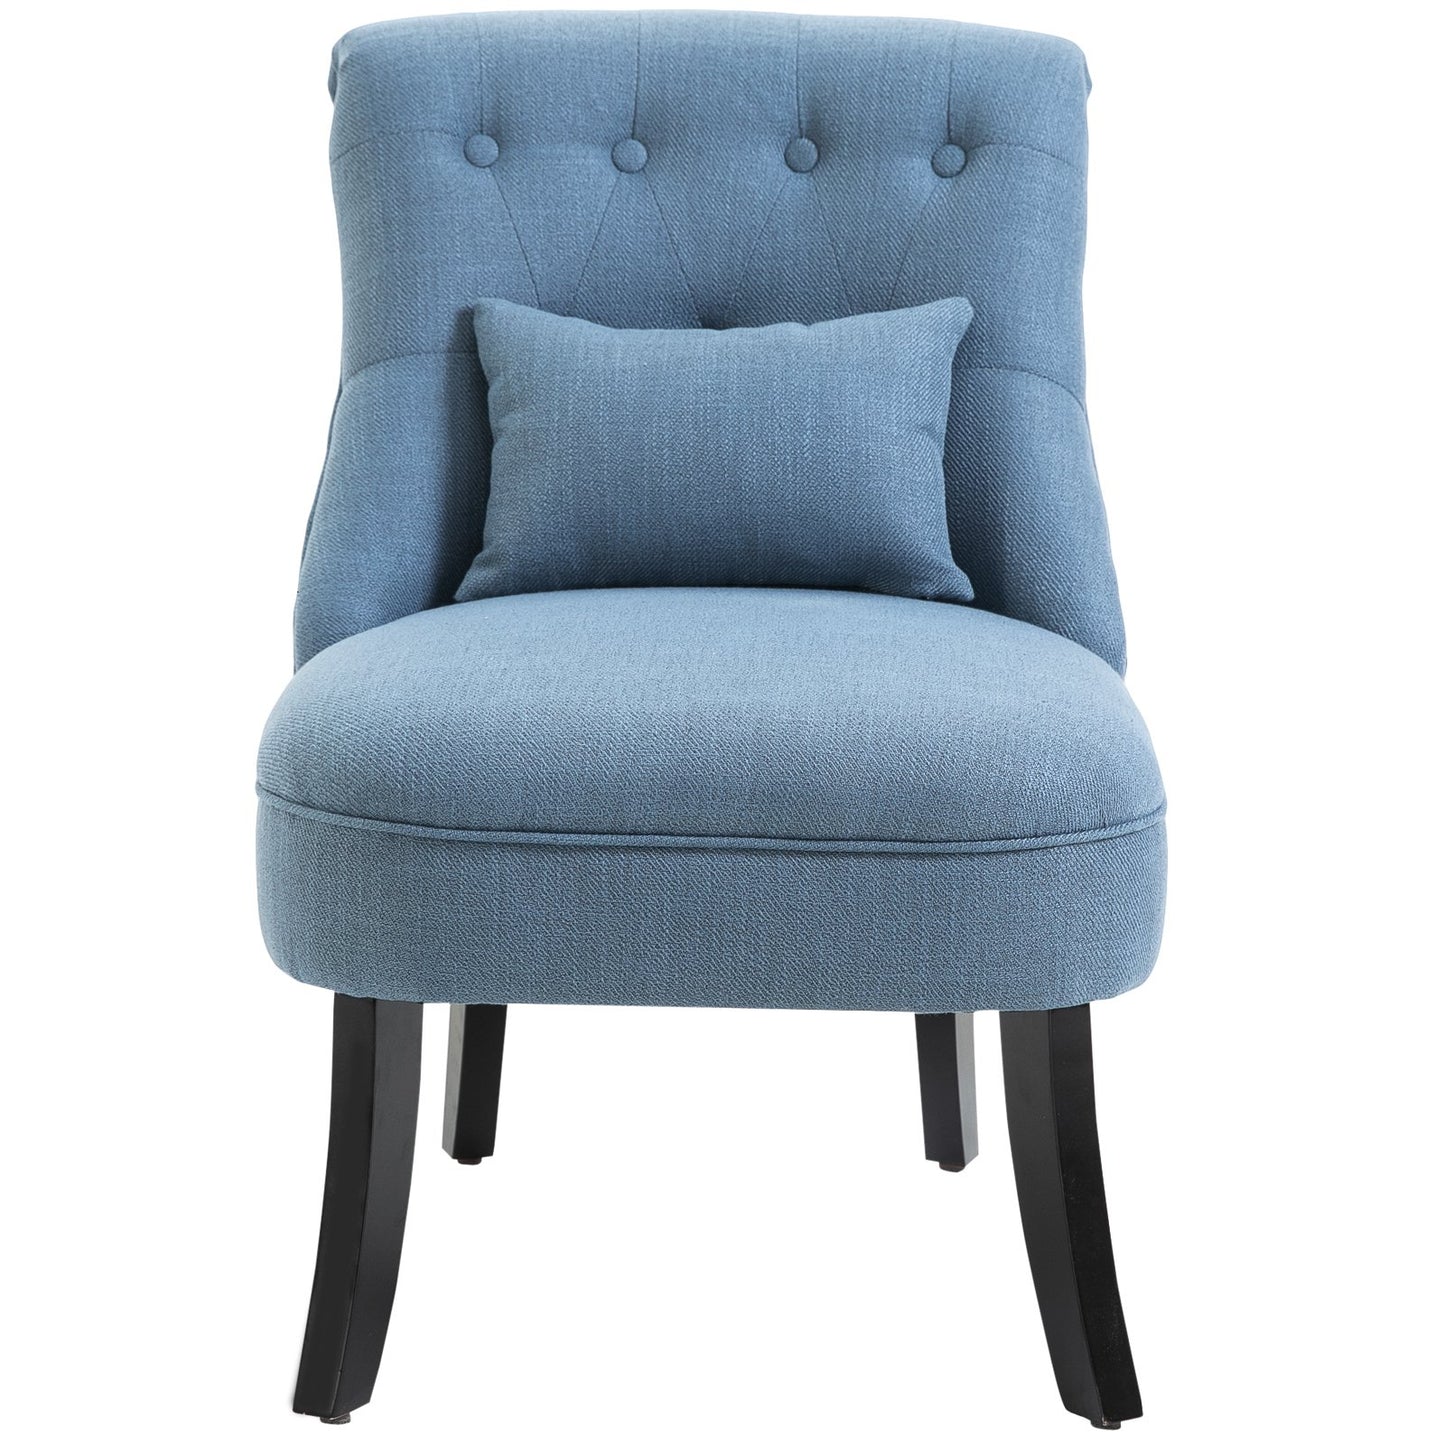 HOMCOM Solid Rubber Wood Tufted Single Sofa Chair w/ Pillow Blue